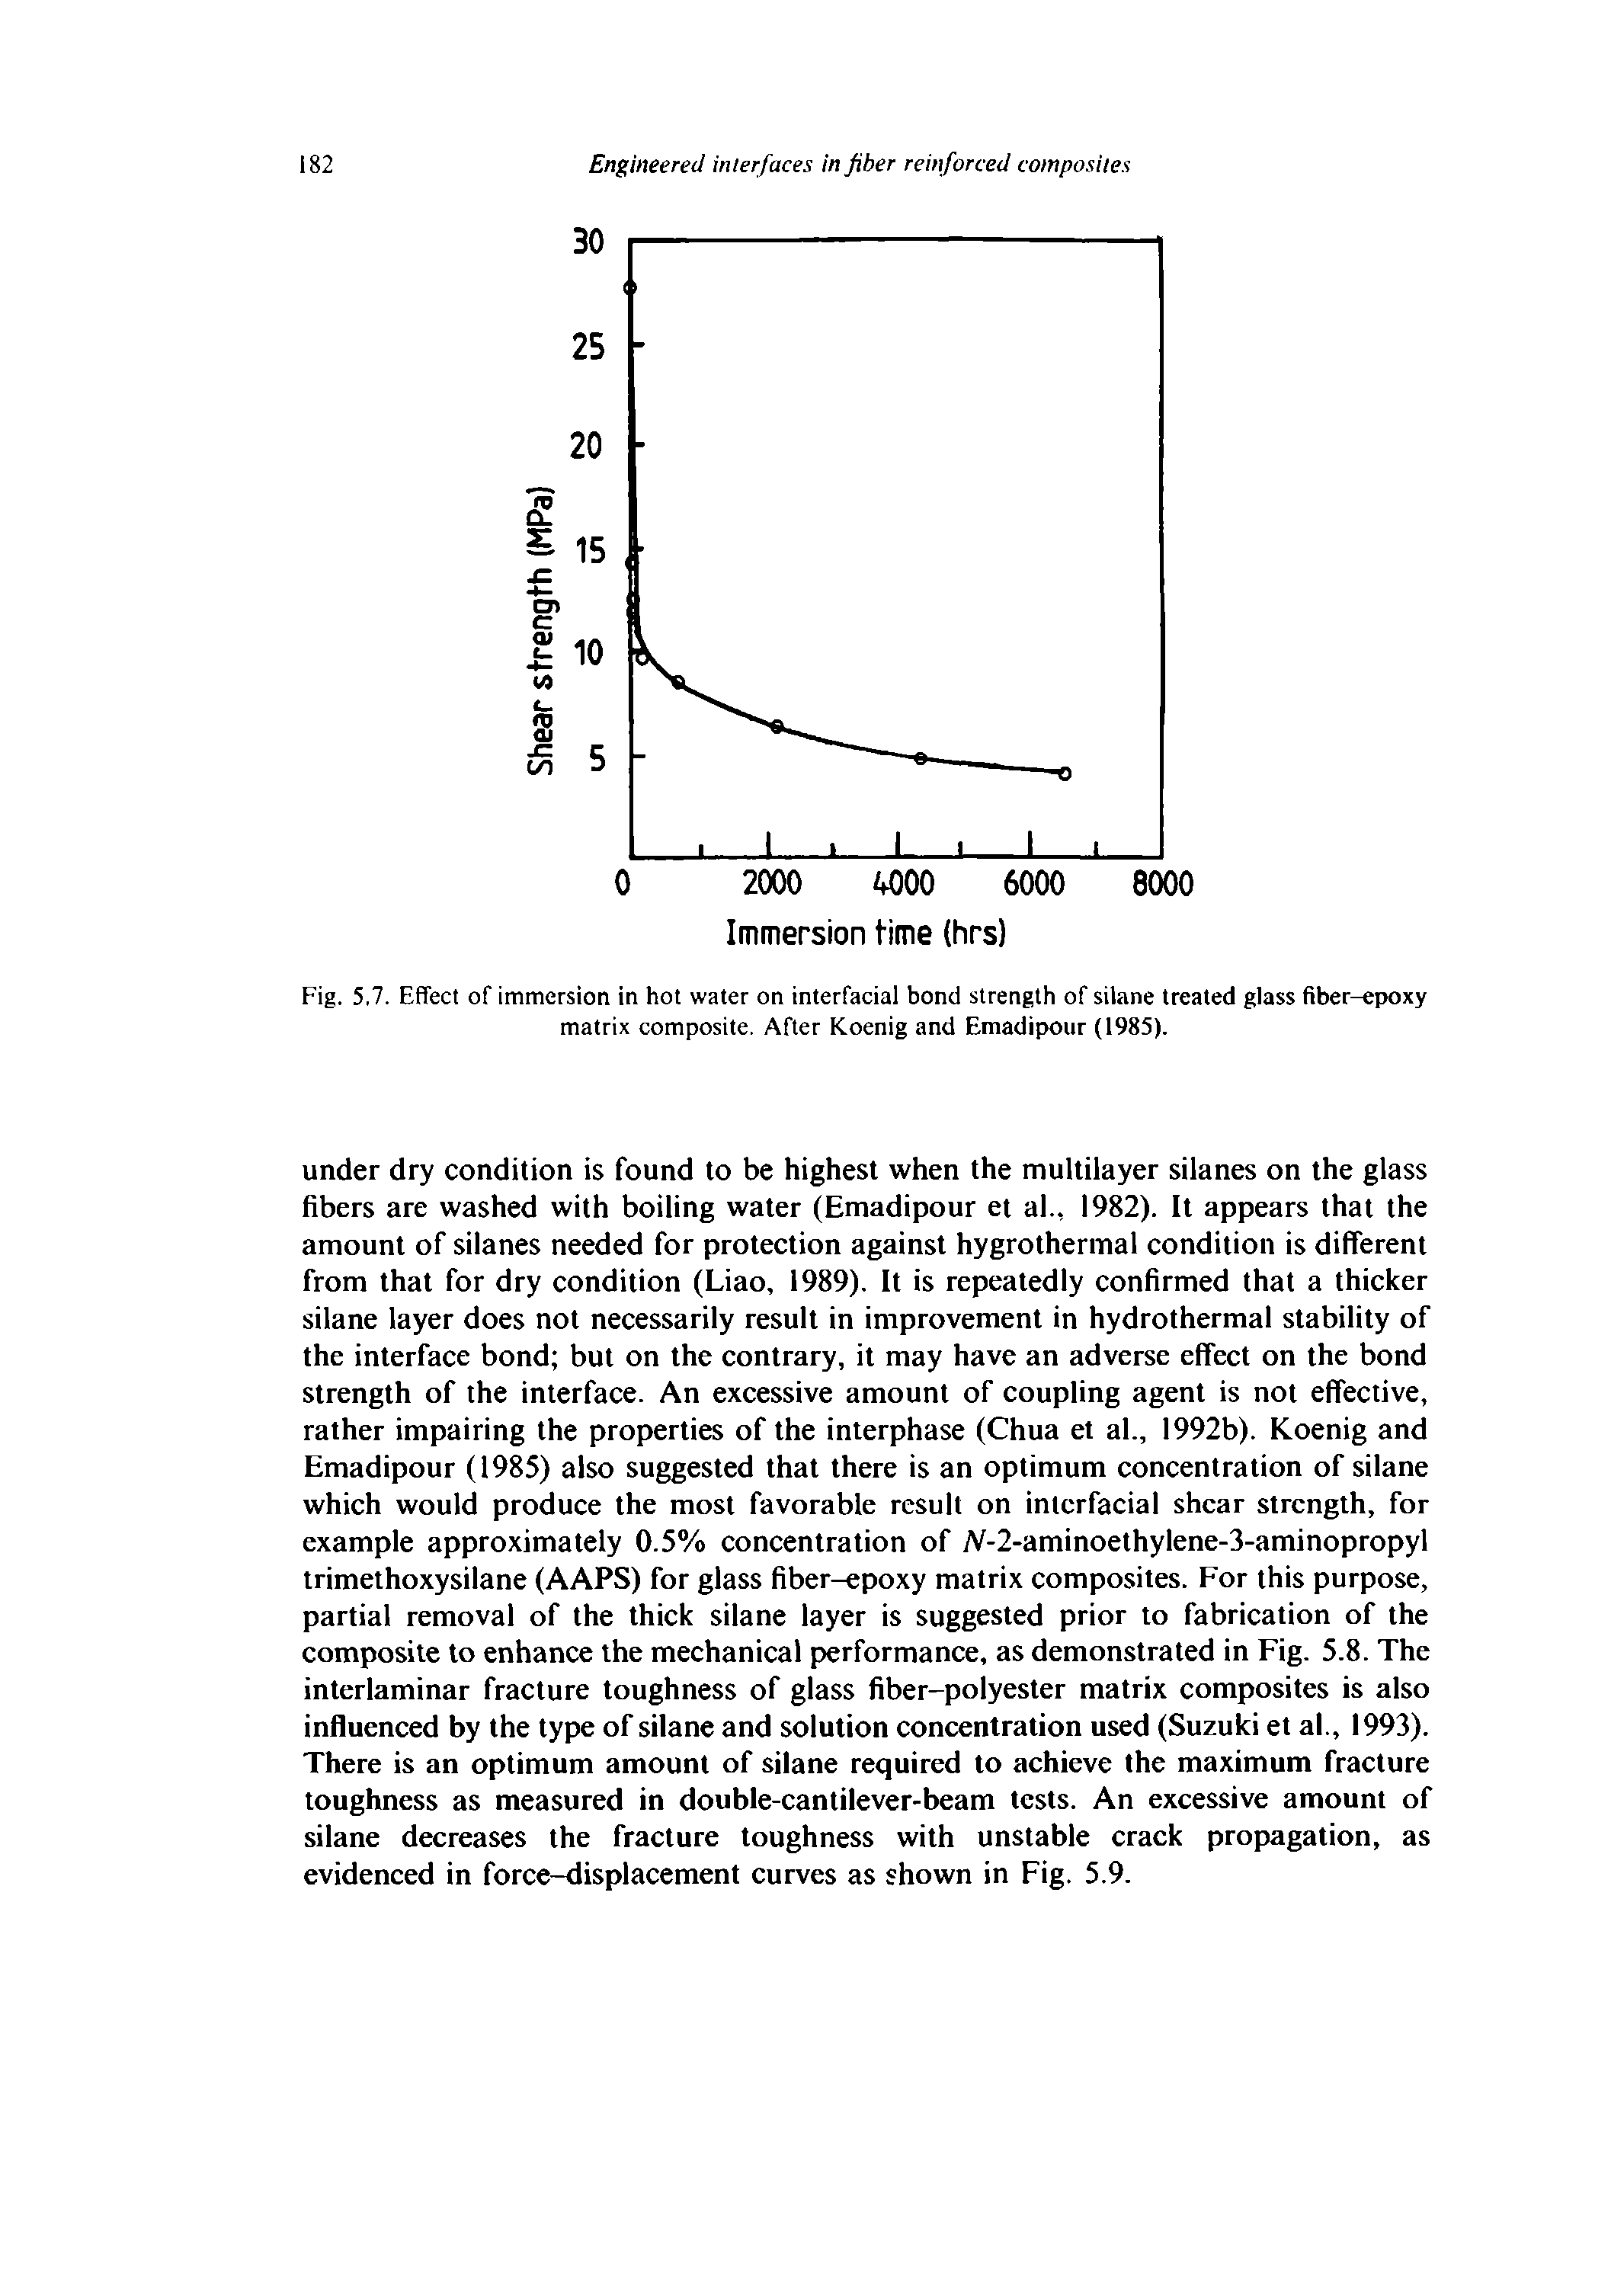 Fig. 5.7. Effect of immersion in hot water on interfacial bond strength of silane treated glass fiber-epoxy matrix composite. After Koenig and Emadipotir (1985).